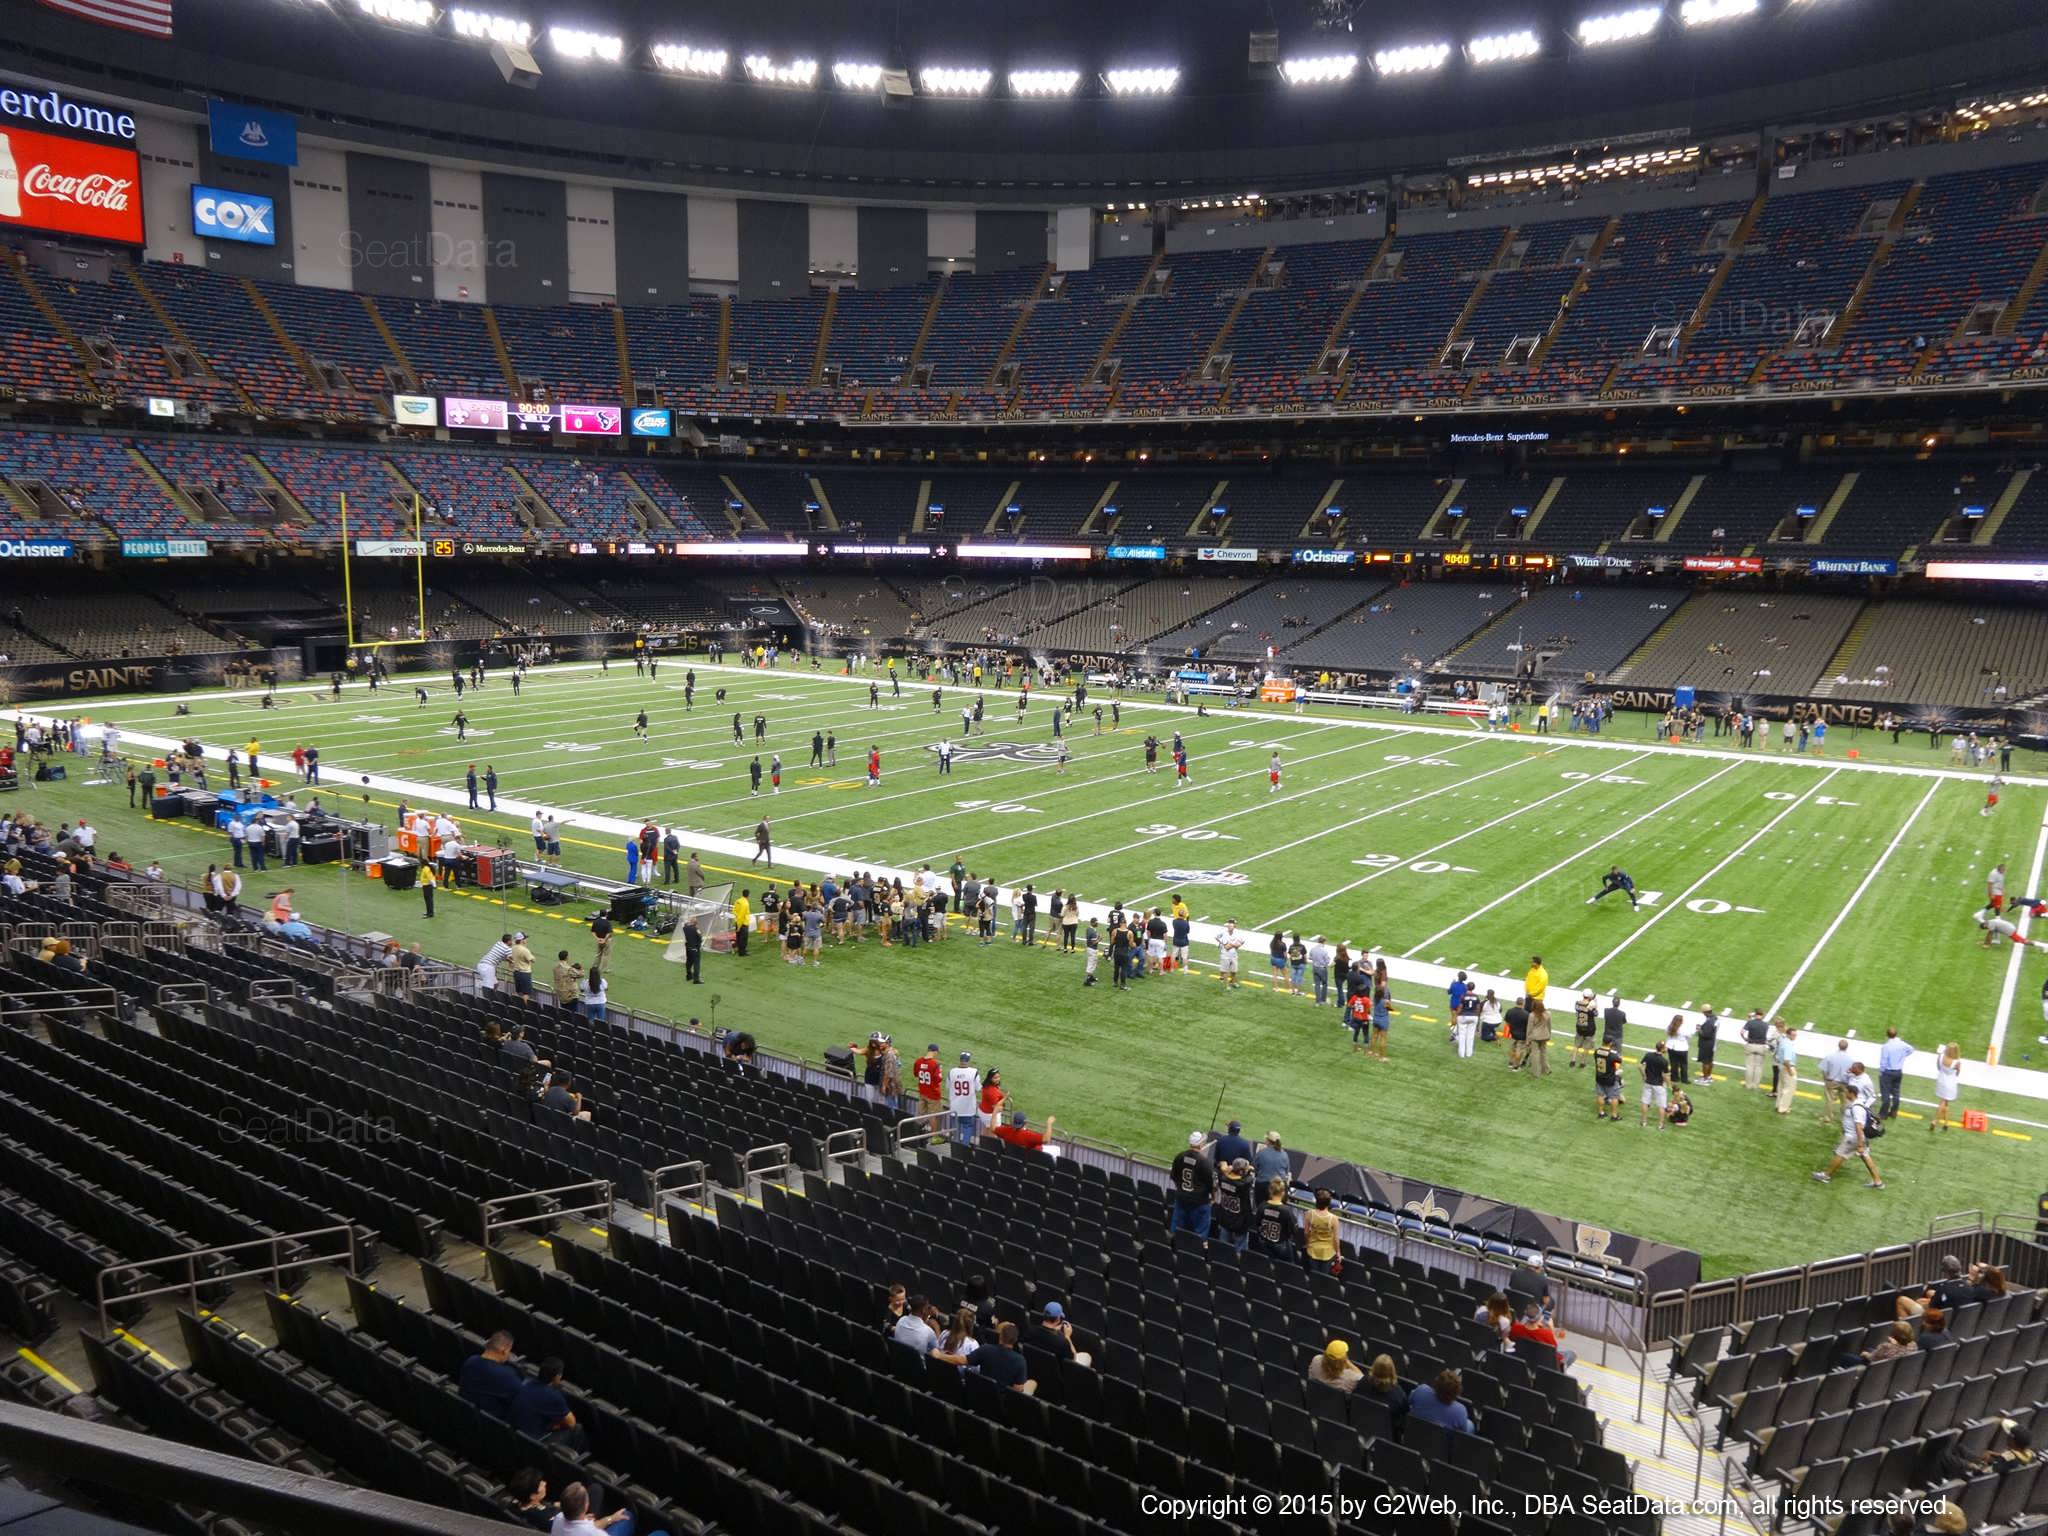 Seat view from section 213 at the Mercedes-Benz Superdome, home of the New Orleans Saints